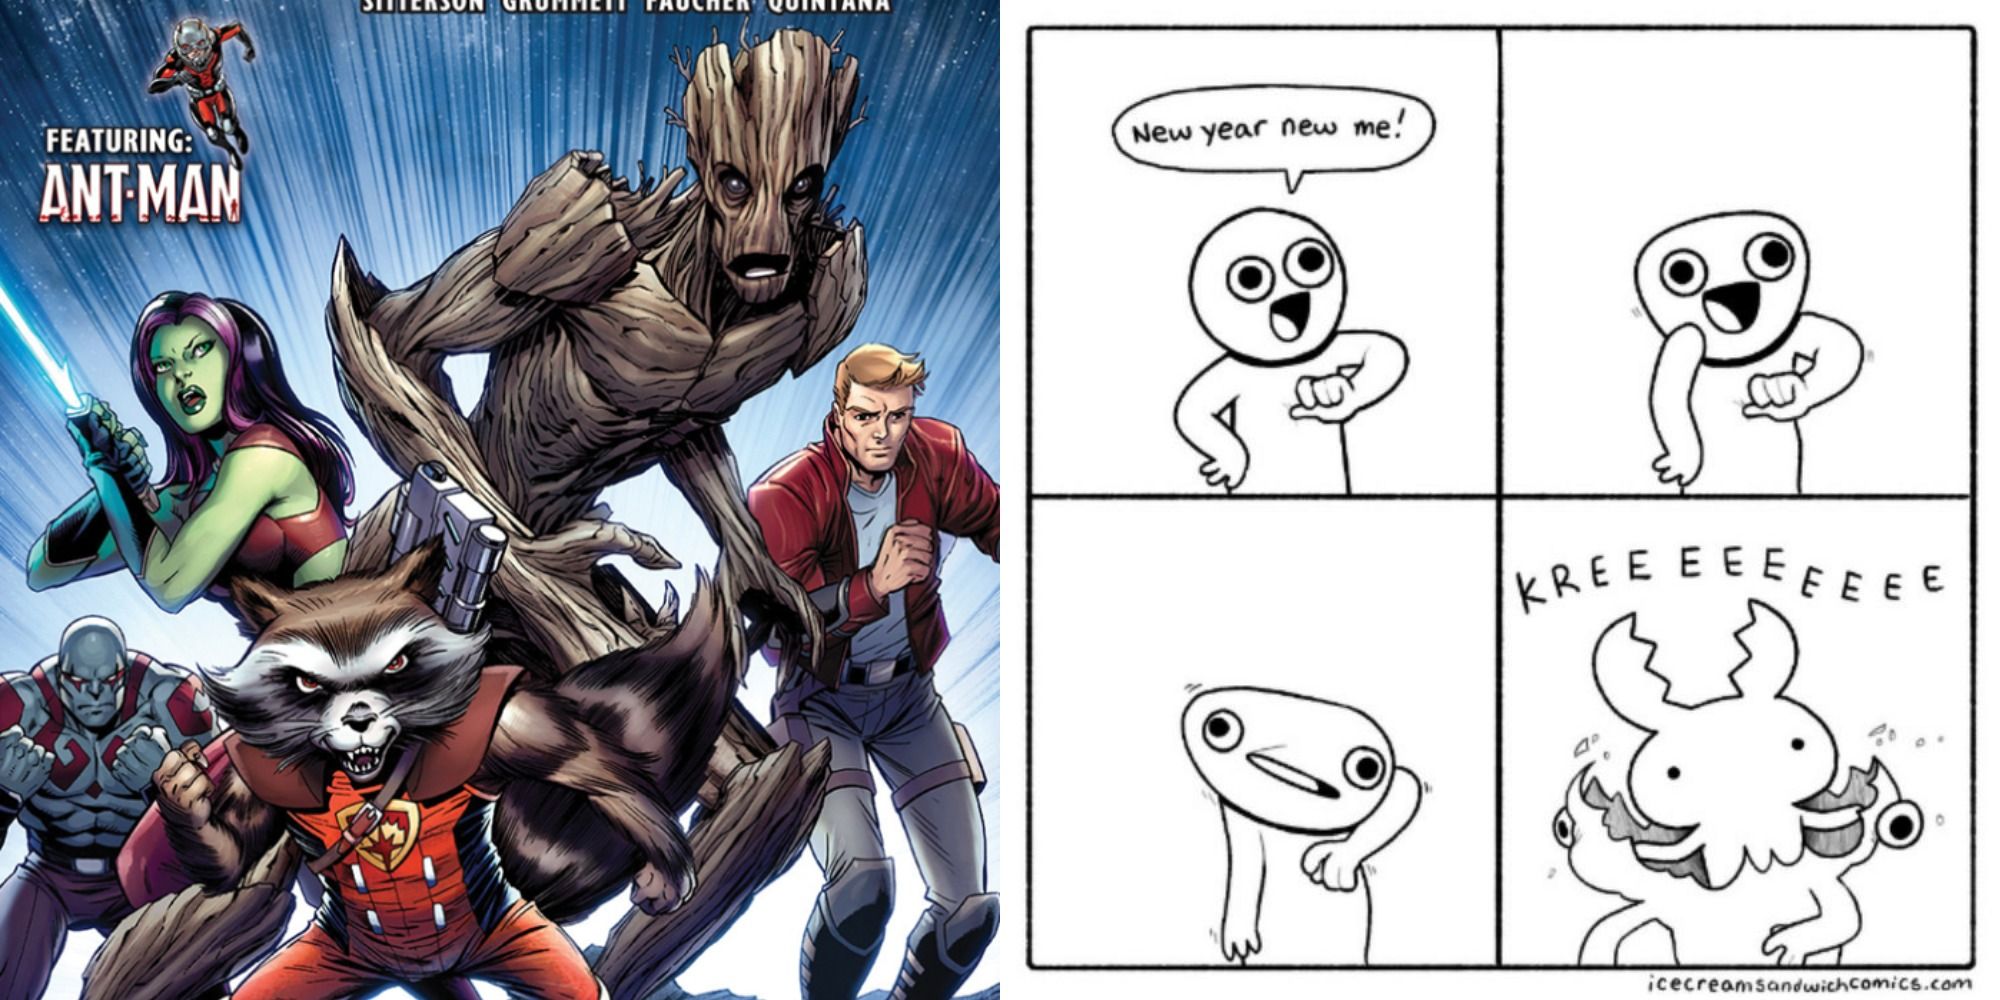 manga-guardians-of-the-galaxy-10-memes-that-perfectly-sum-up-the-comic-books-mangareader-lol